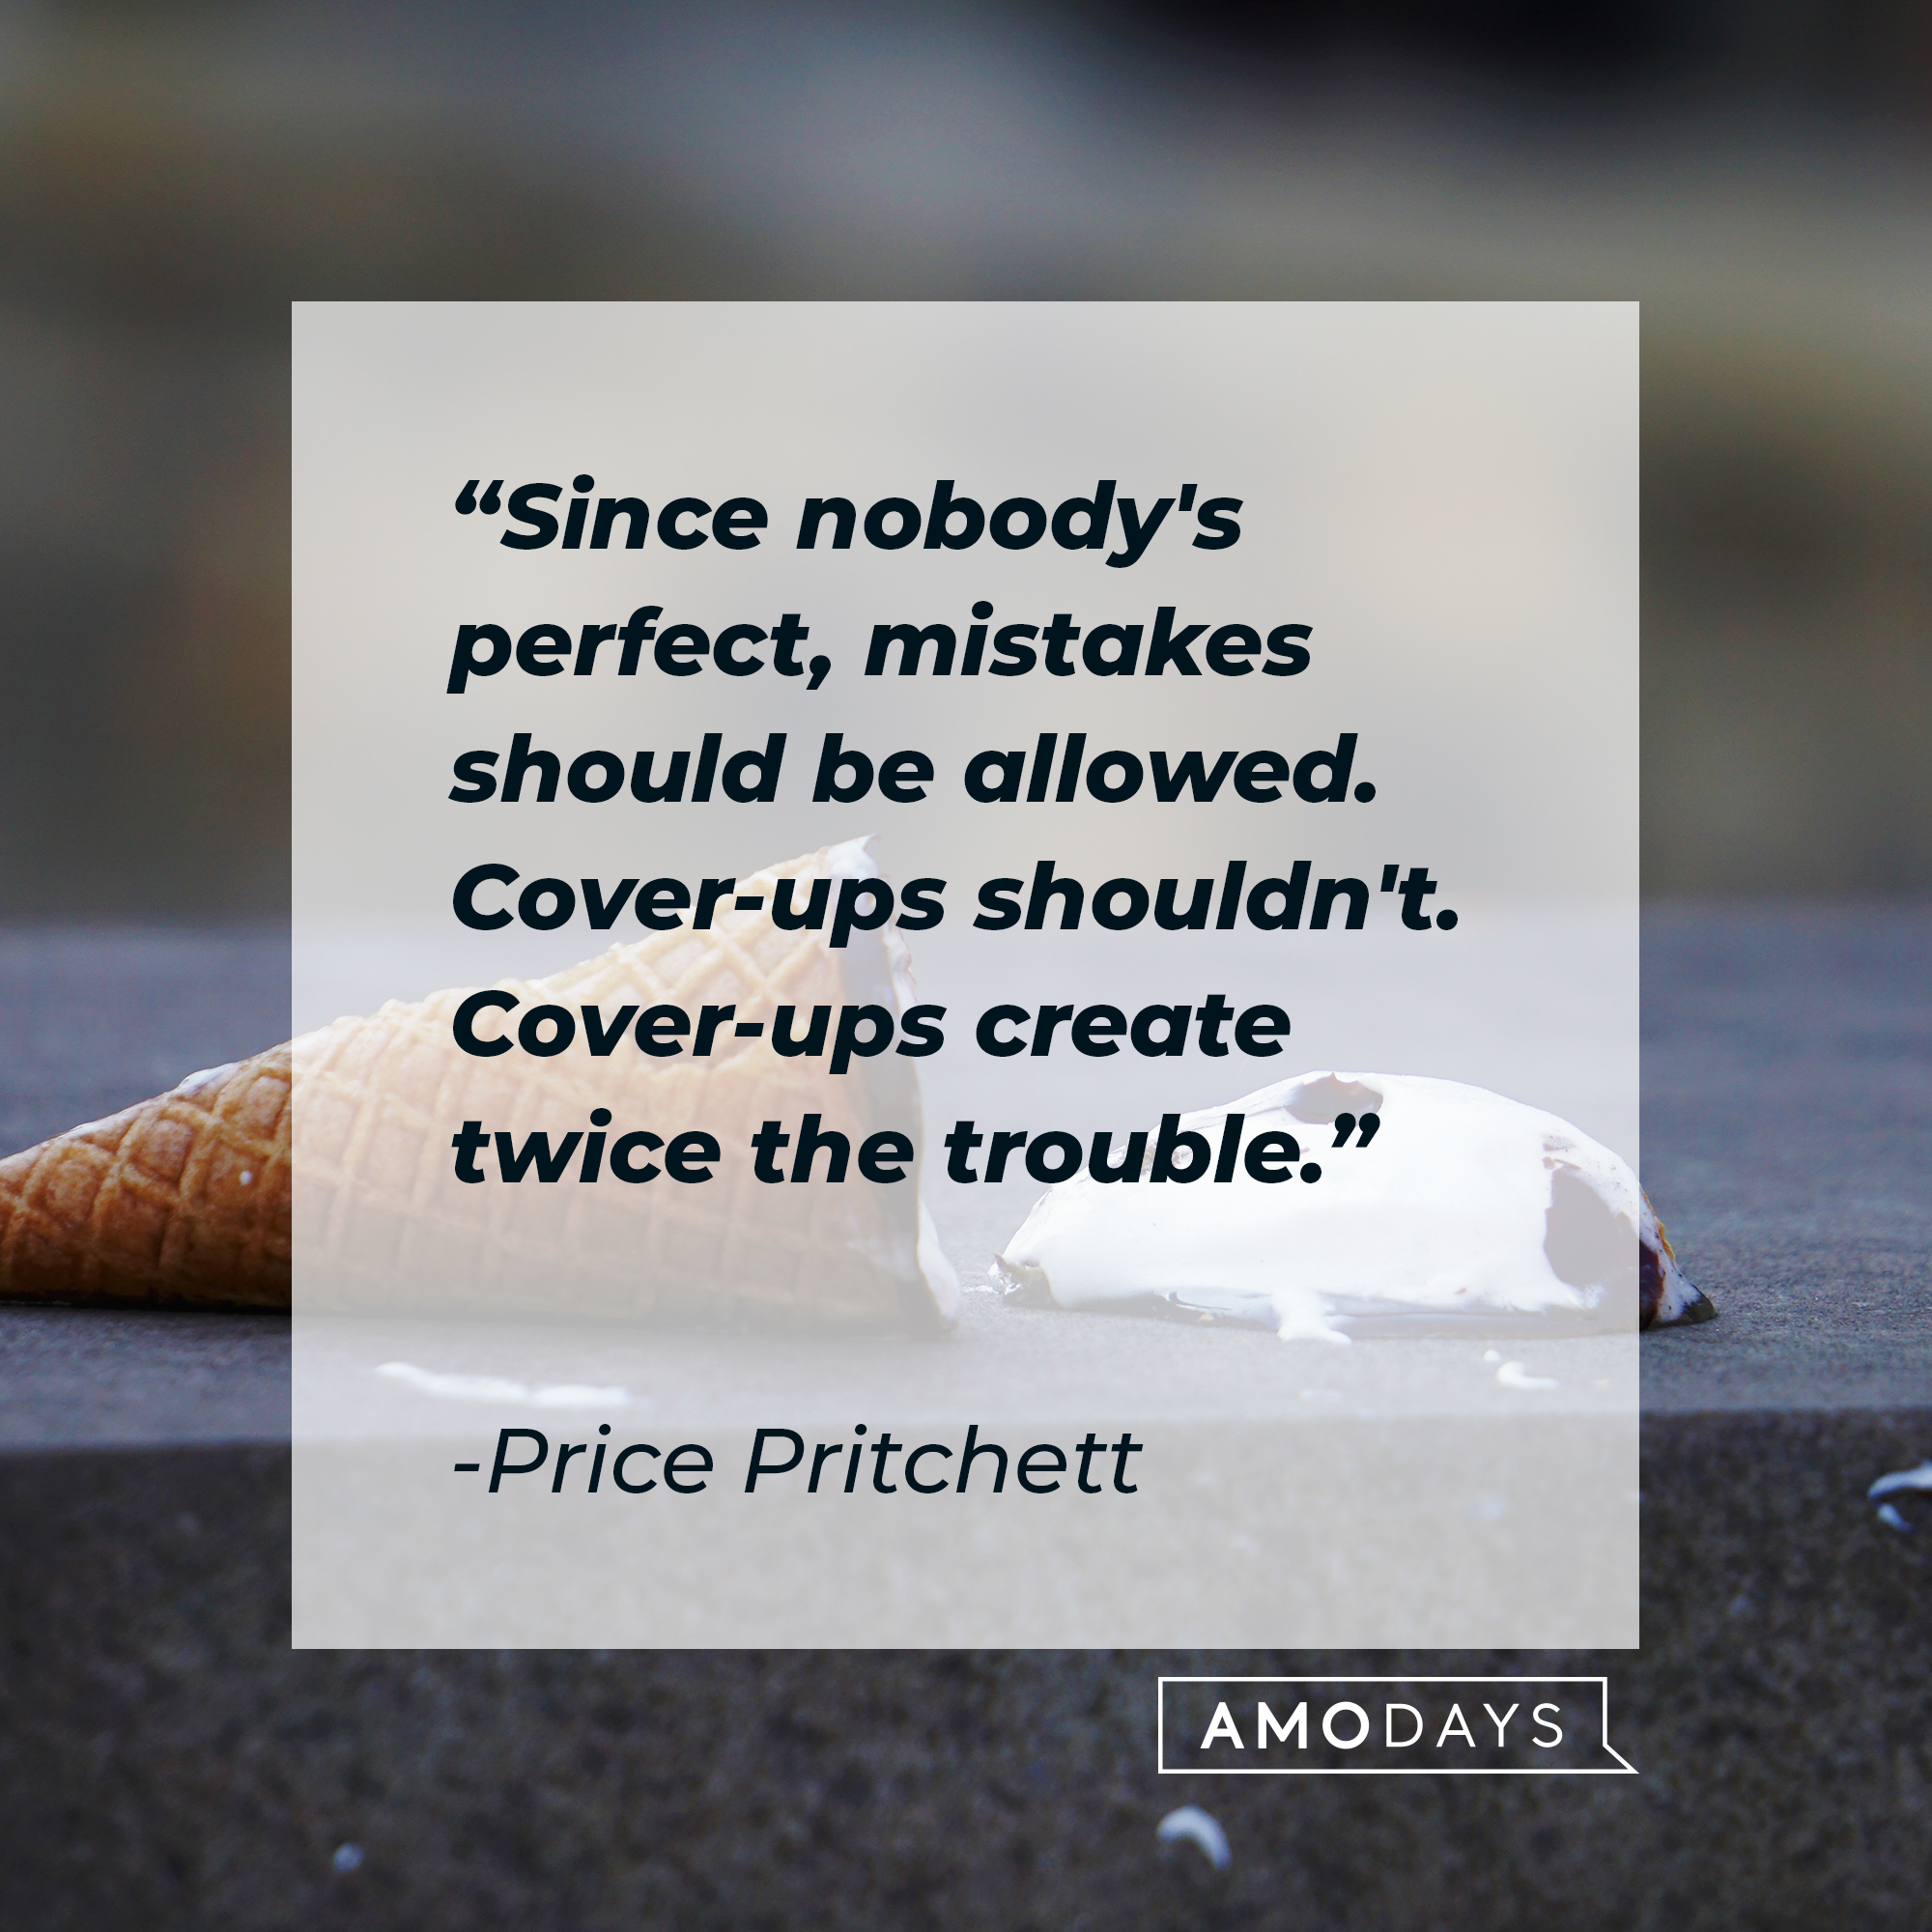 Price Pritchett's quote: "Since nobody's perfect, mistakes should be allowed. Cover-ups shouldn't. Cover-ups create twice the trouble." | Image: Unsplash